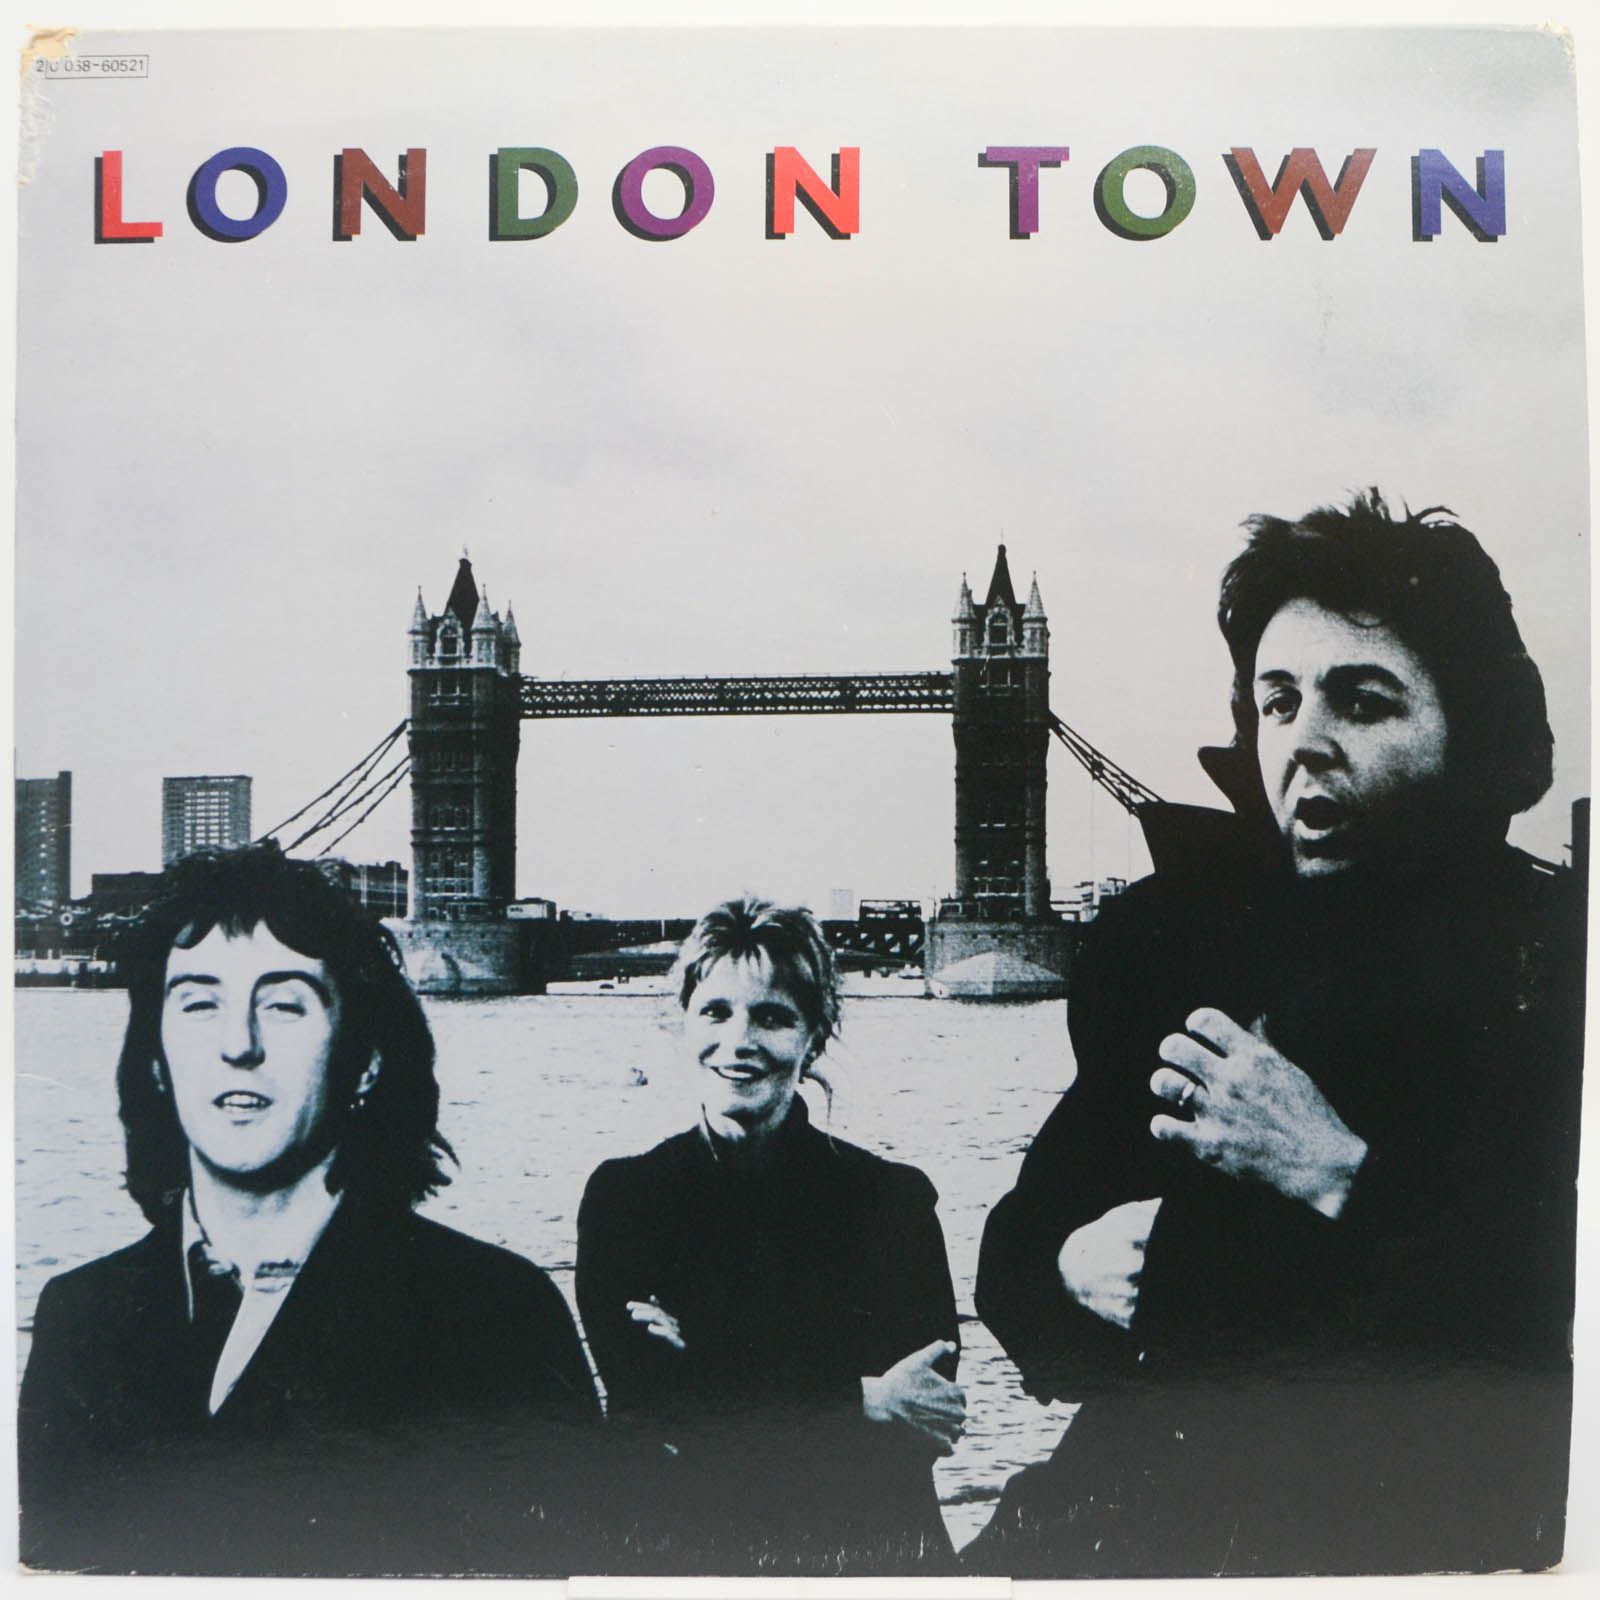 Wings — London Town (poster), 1978